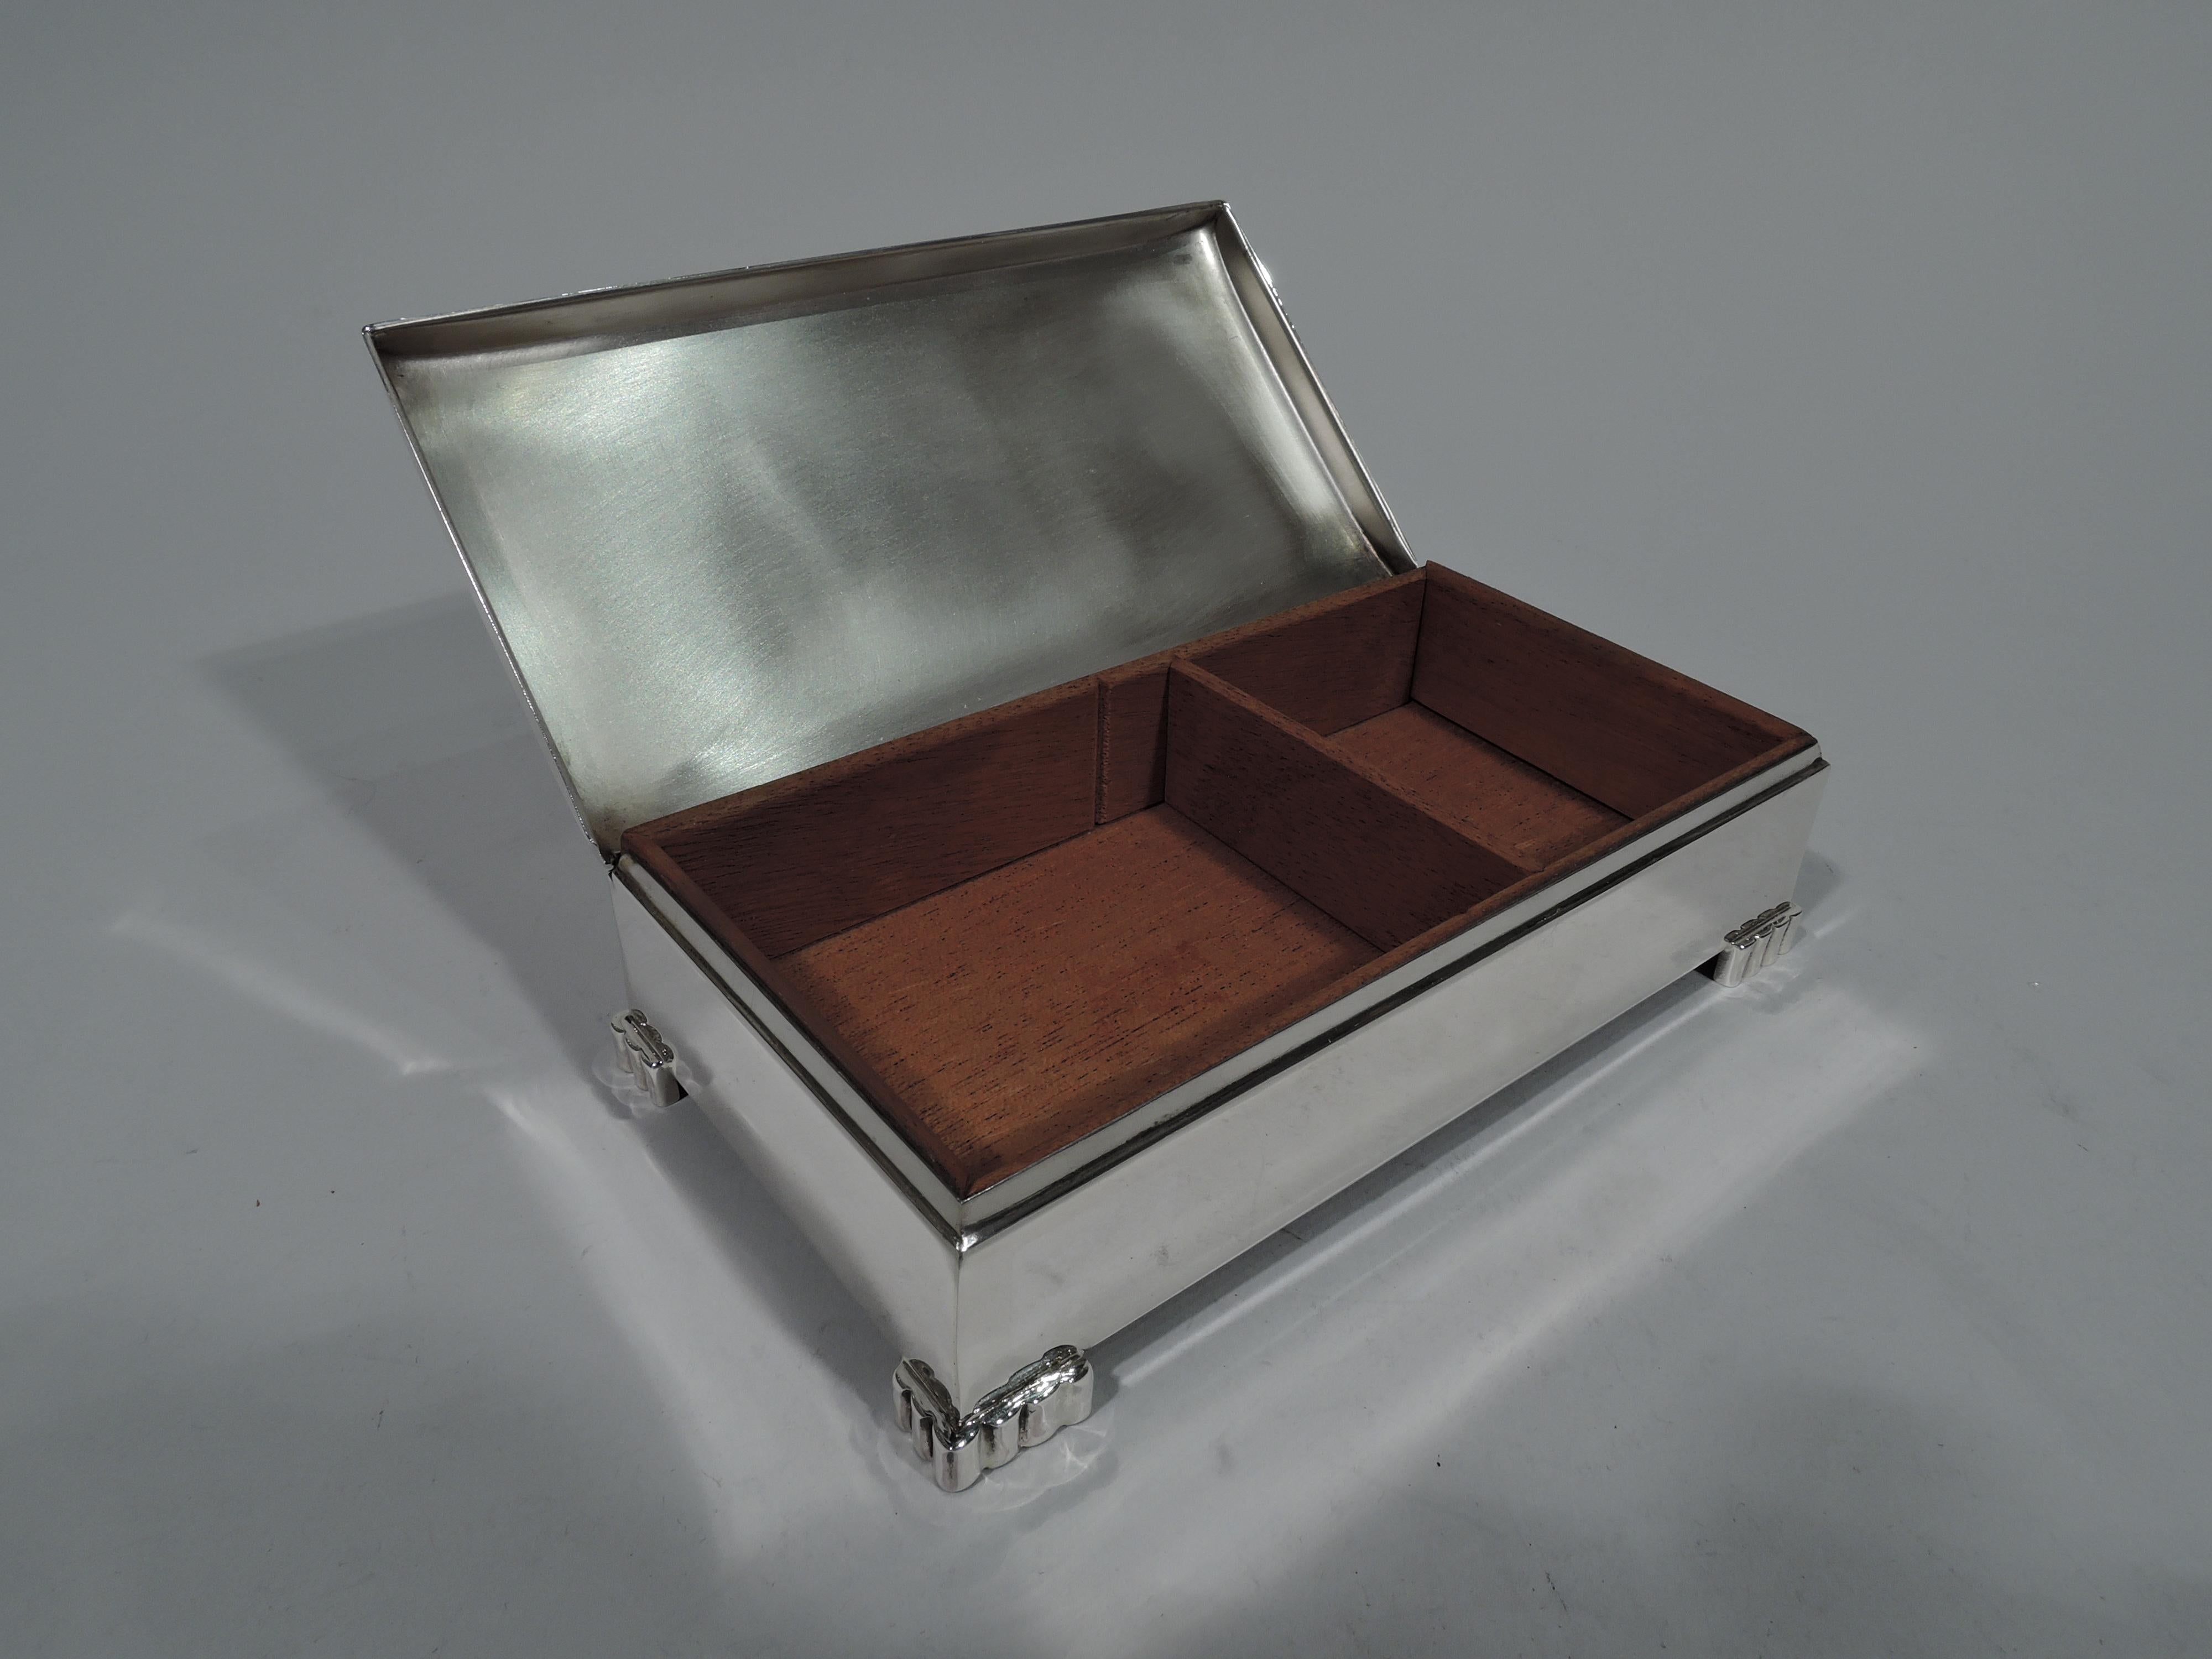 Mid-Century Modern sterling silver box. Made by Poole in Taunton, Mass. The Classic design by this maker with rectangular with straight sides and lobed bracket feet applied at corners. Cover hinged and curved. Box and cover interior cedar lined and